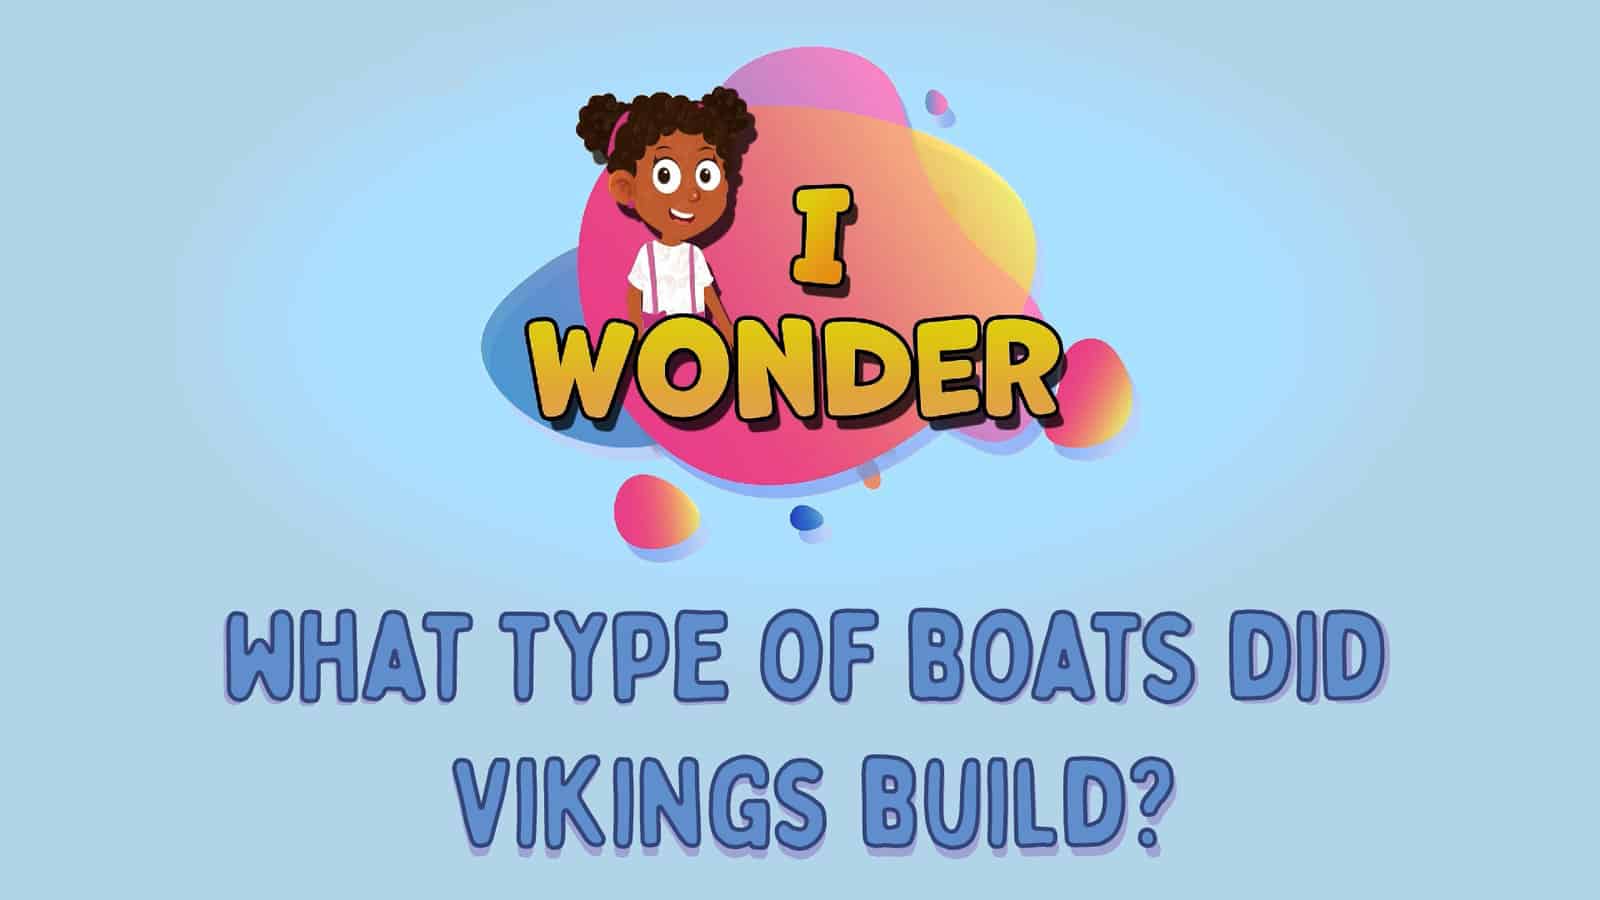 What Type Of Boats Did Vikings Build?